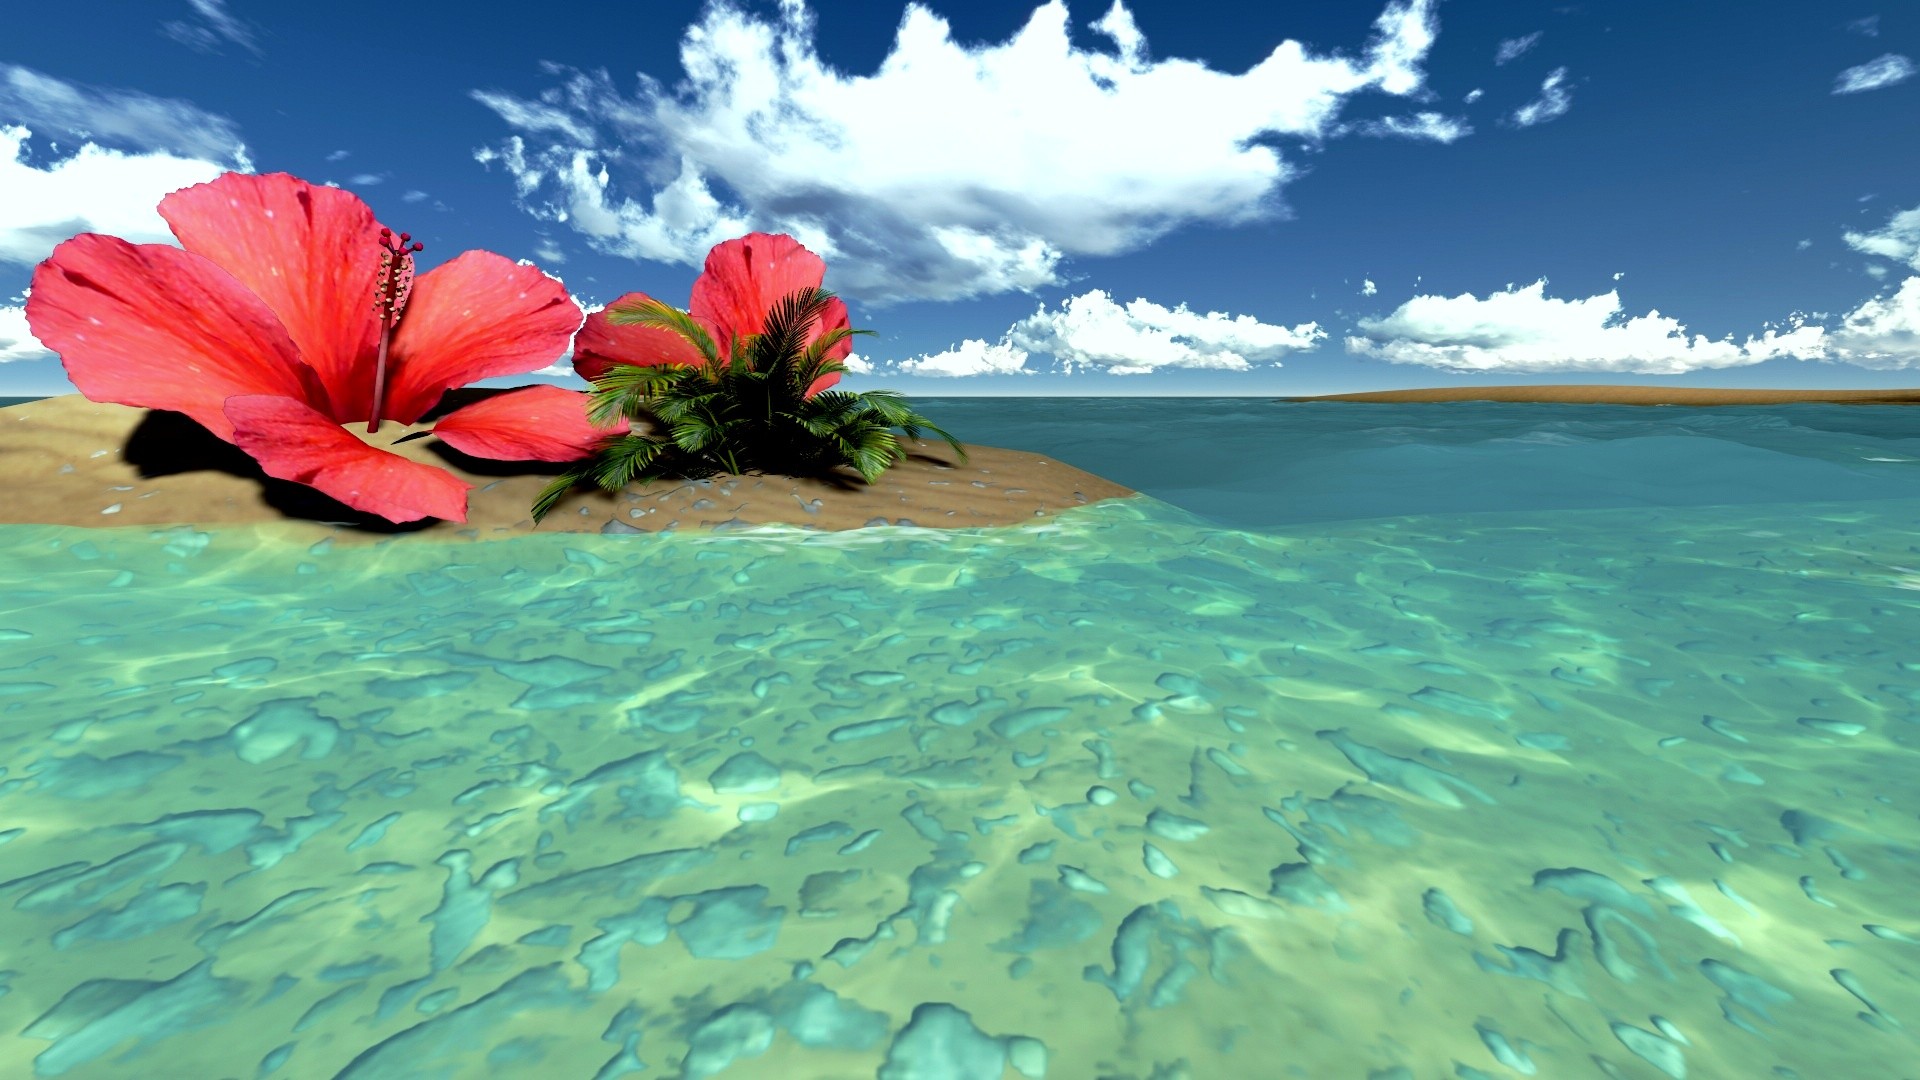 1920x1080 Tropical Background Wallpaper HD Free Download New HD Wallpapers.